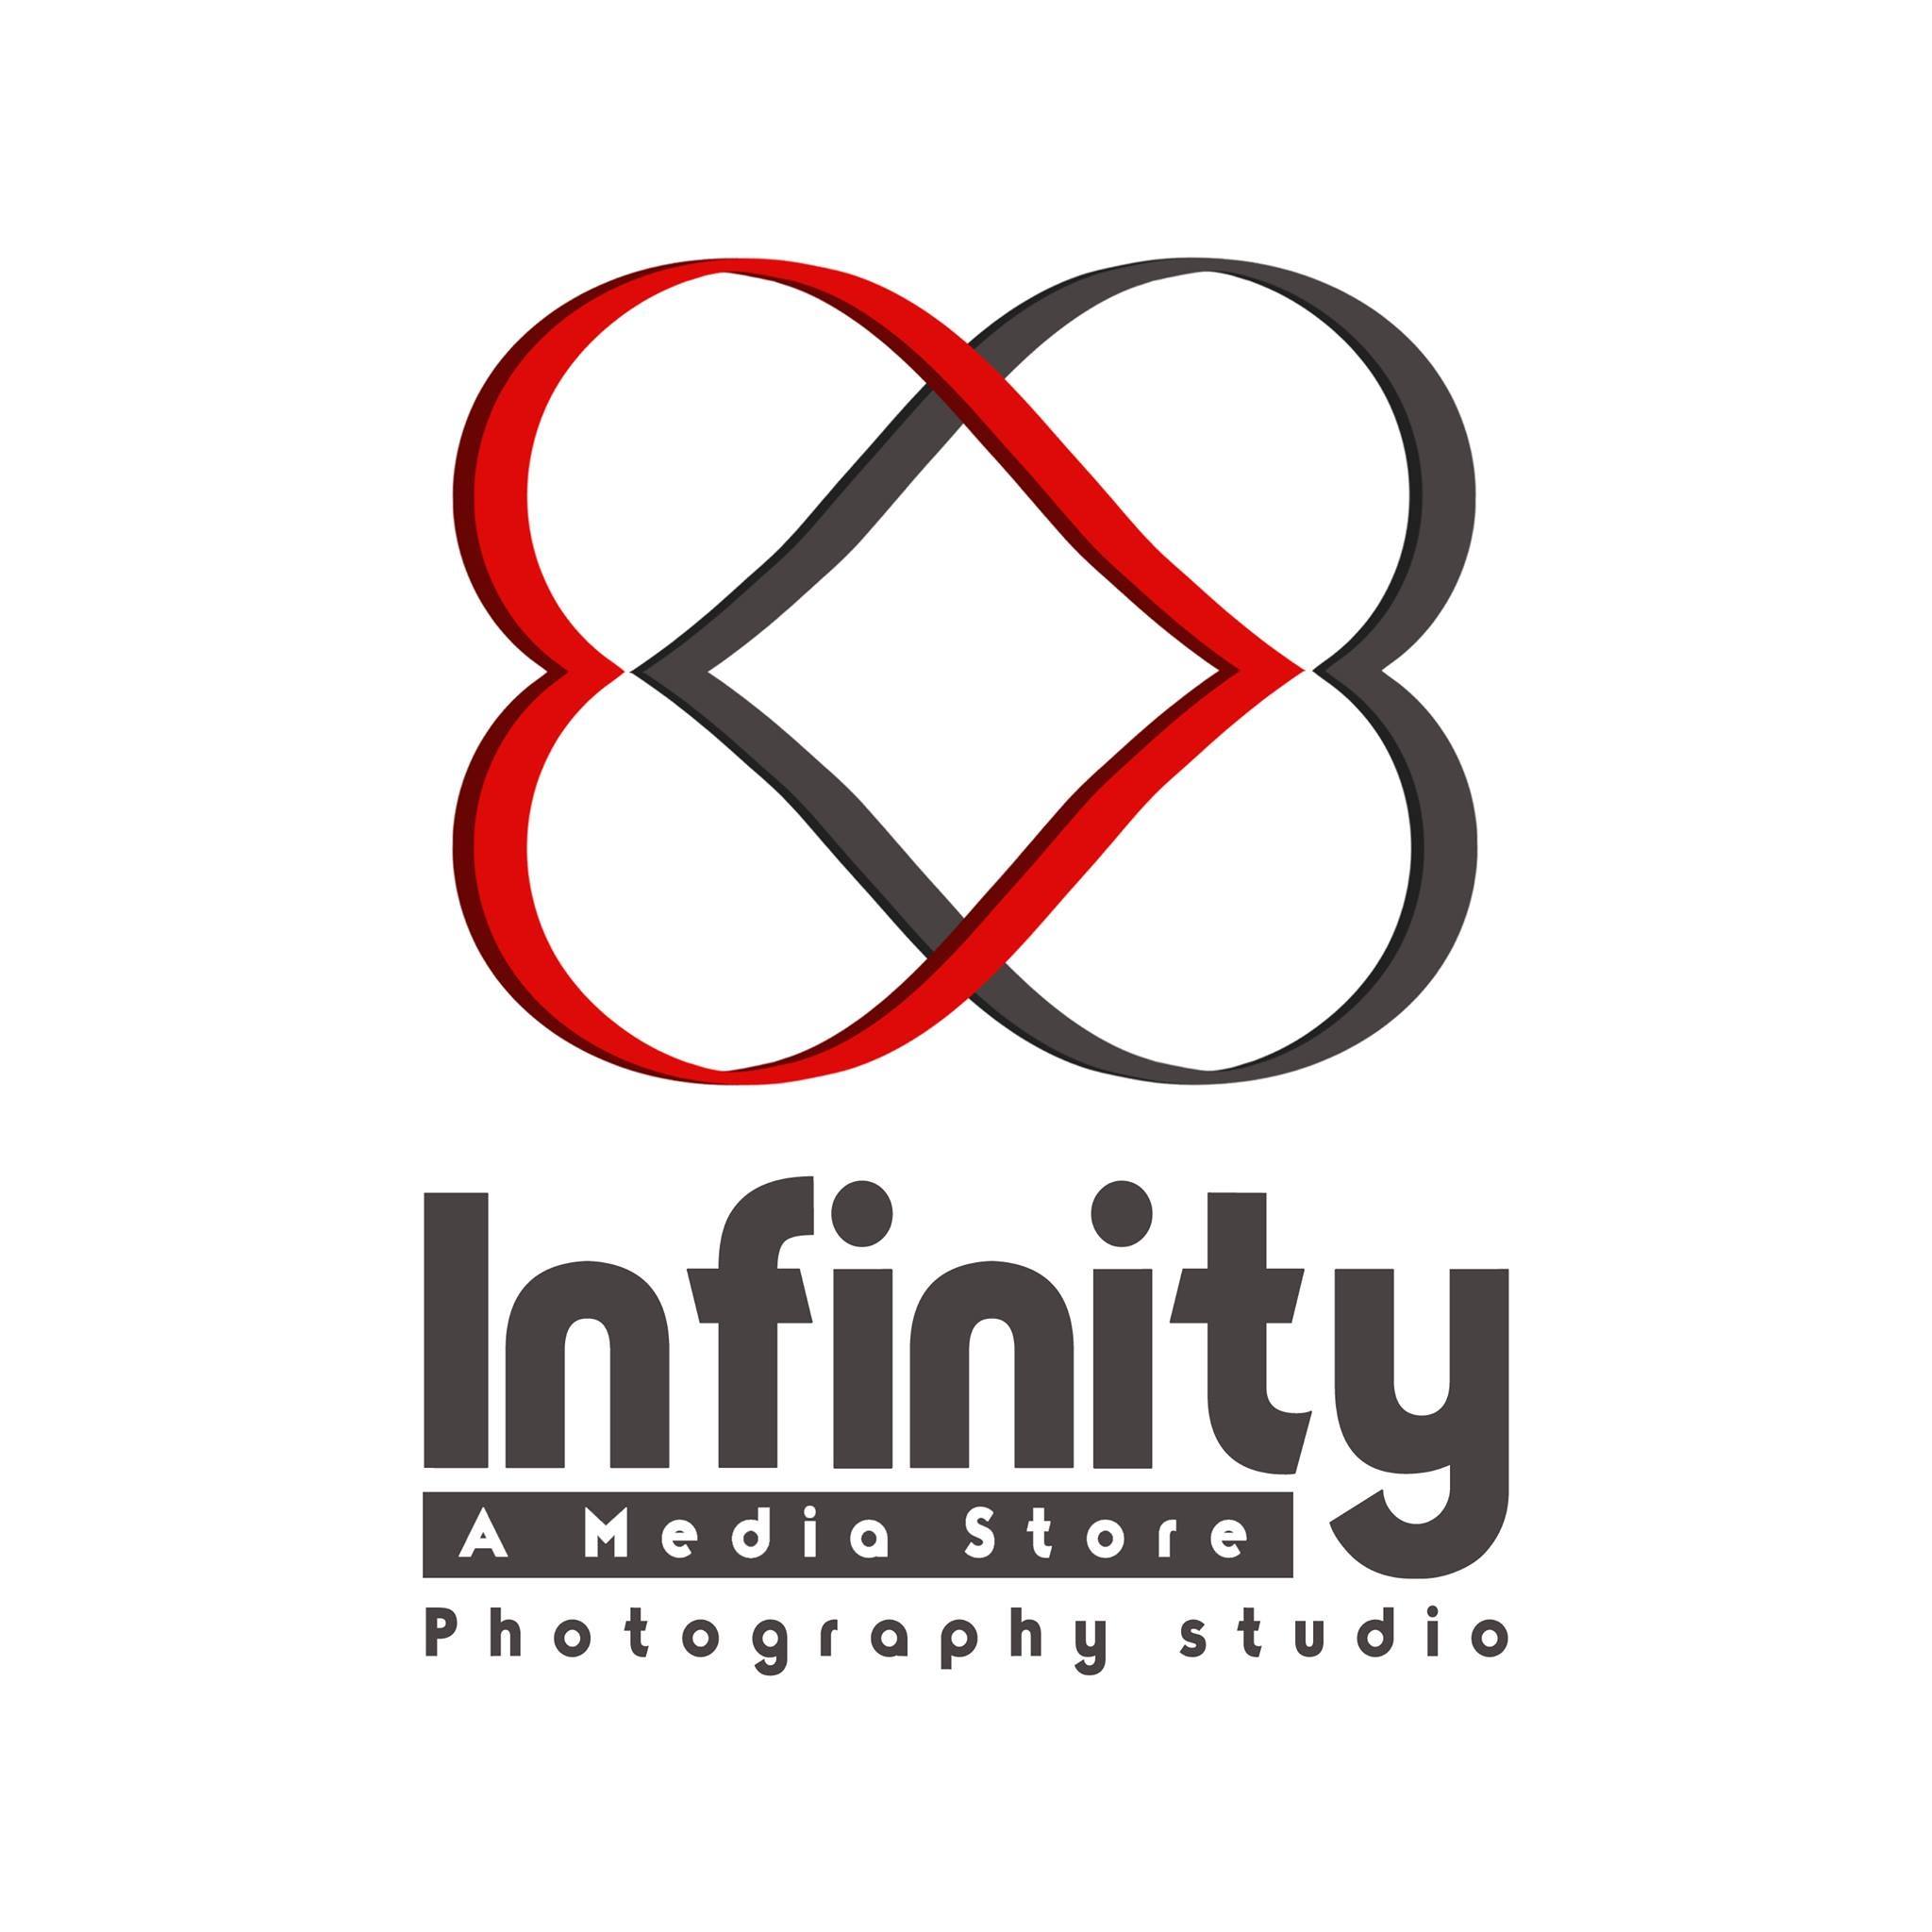 Infinity A Media Store Photography Studio|Catering Services|Event Services